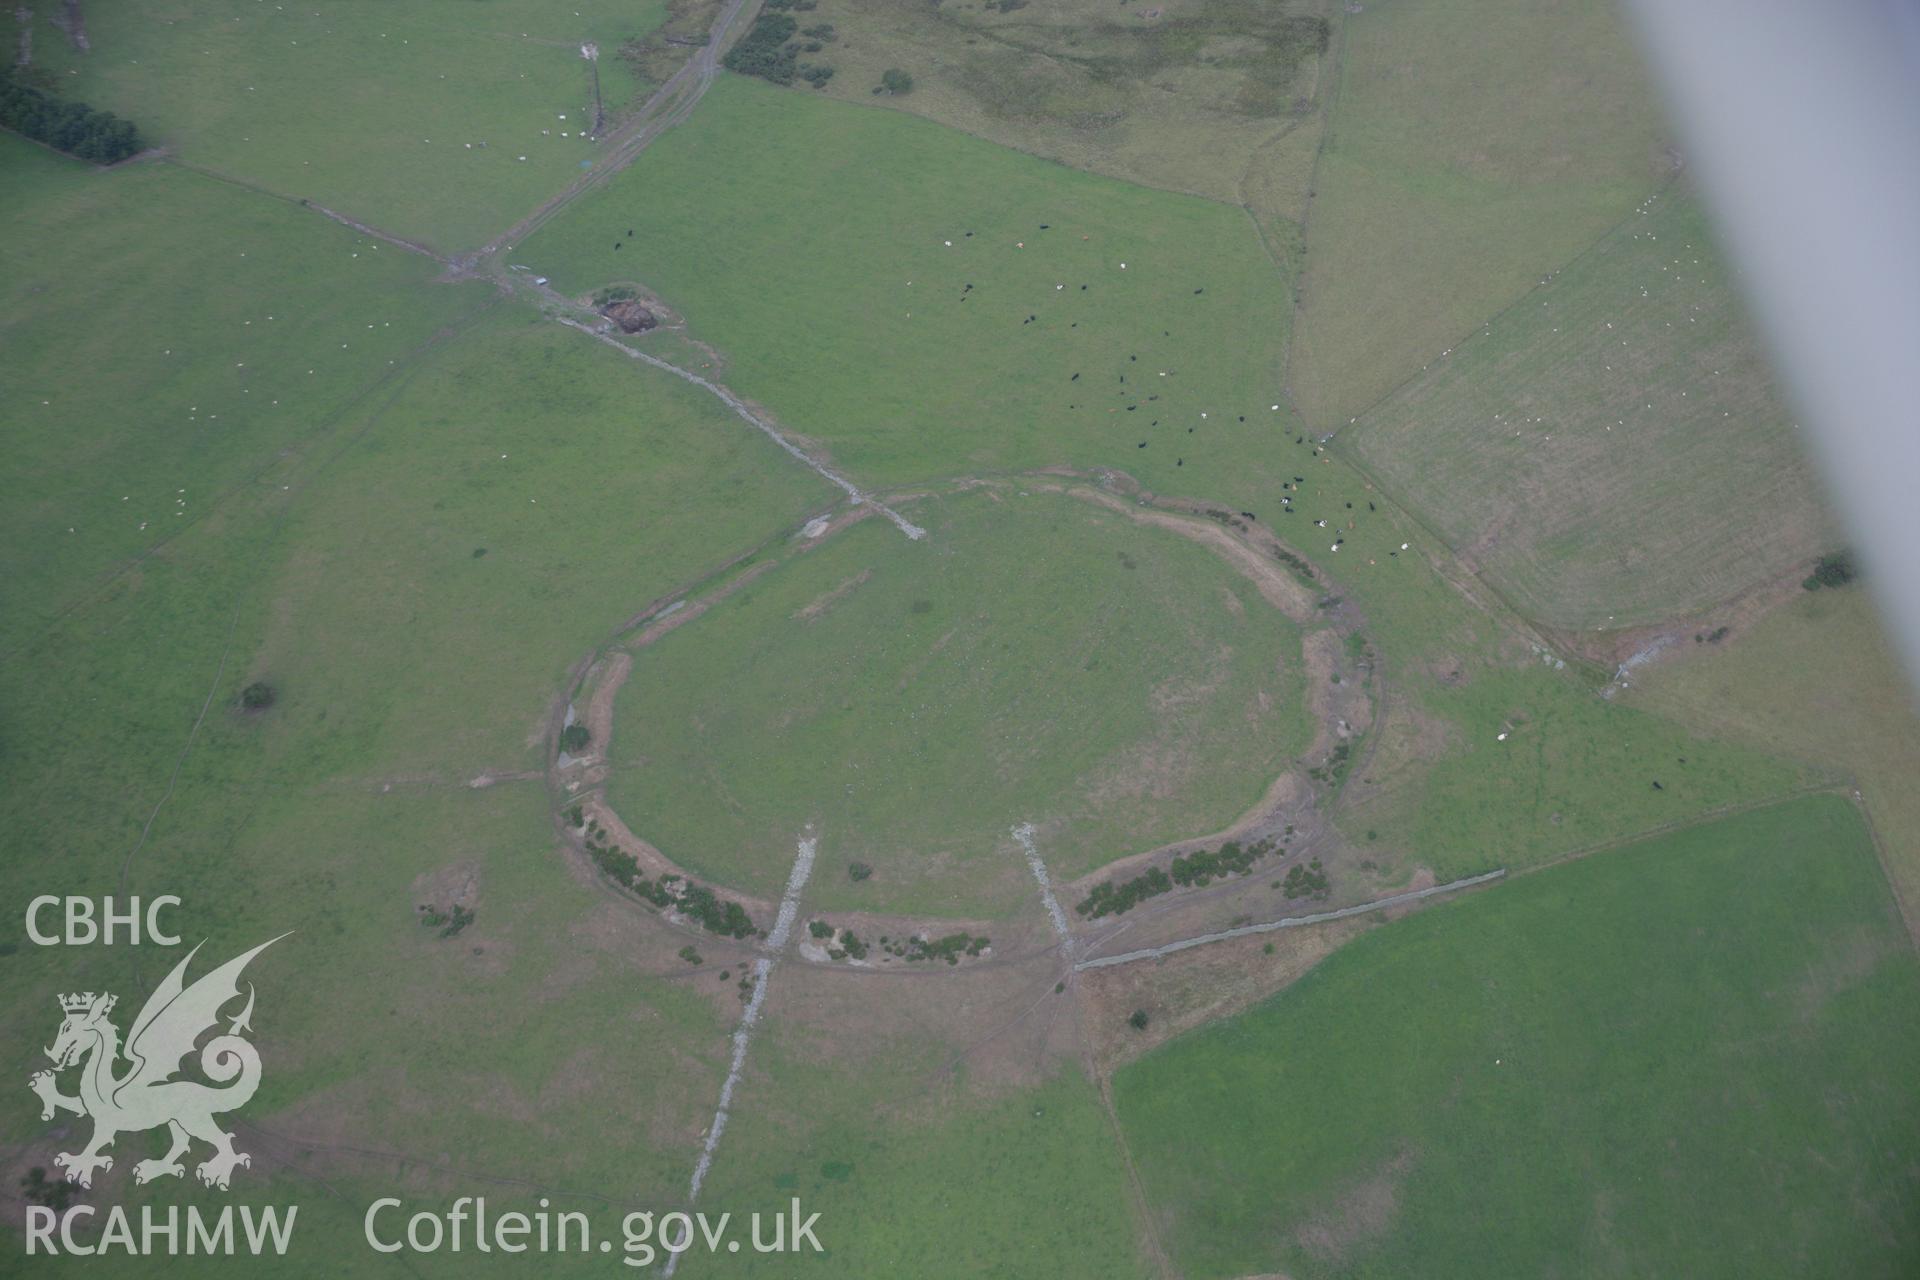 RCAHMW colour oblique aerial photograph of Caer Caradog. Taken on 14 August 2006 by Toby Driver.